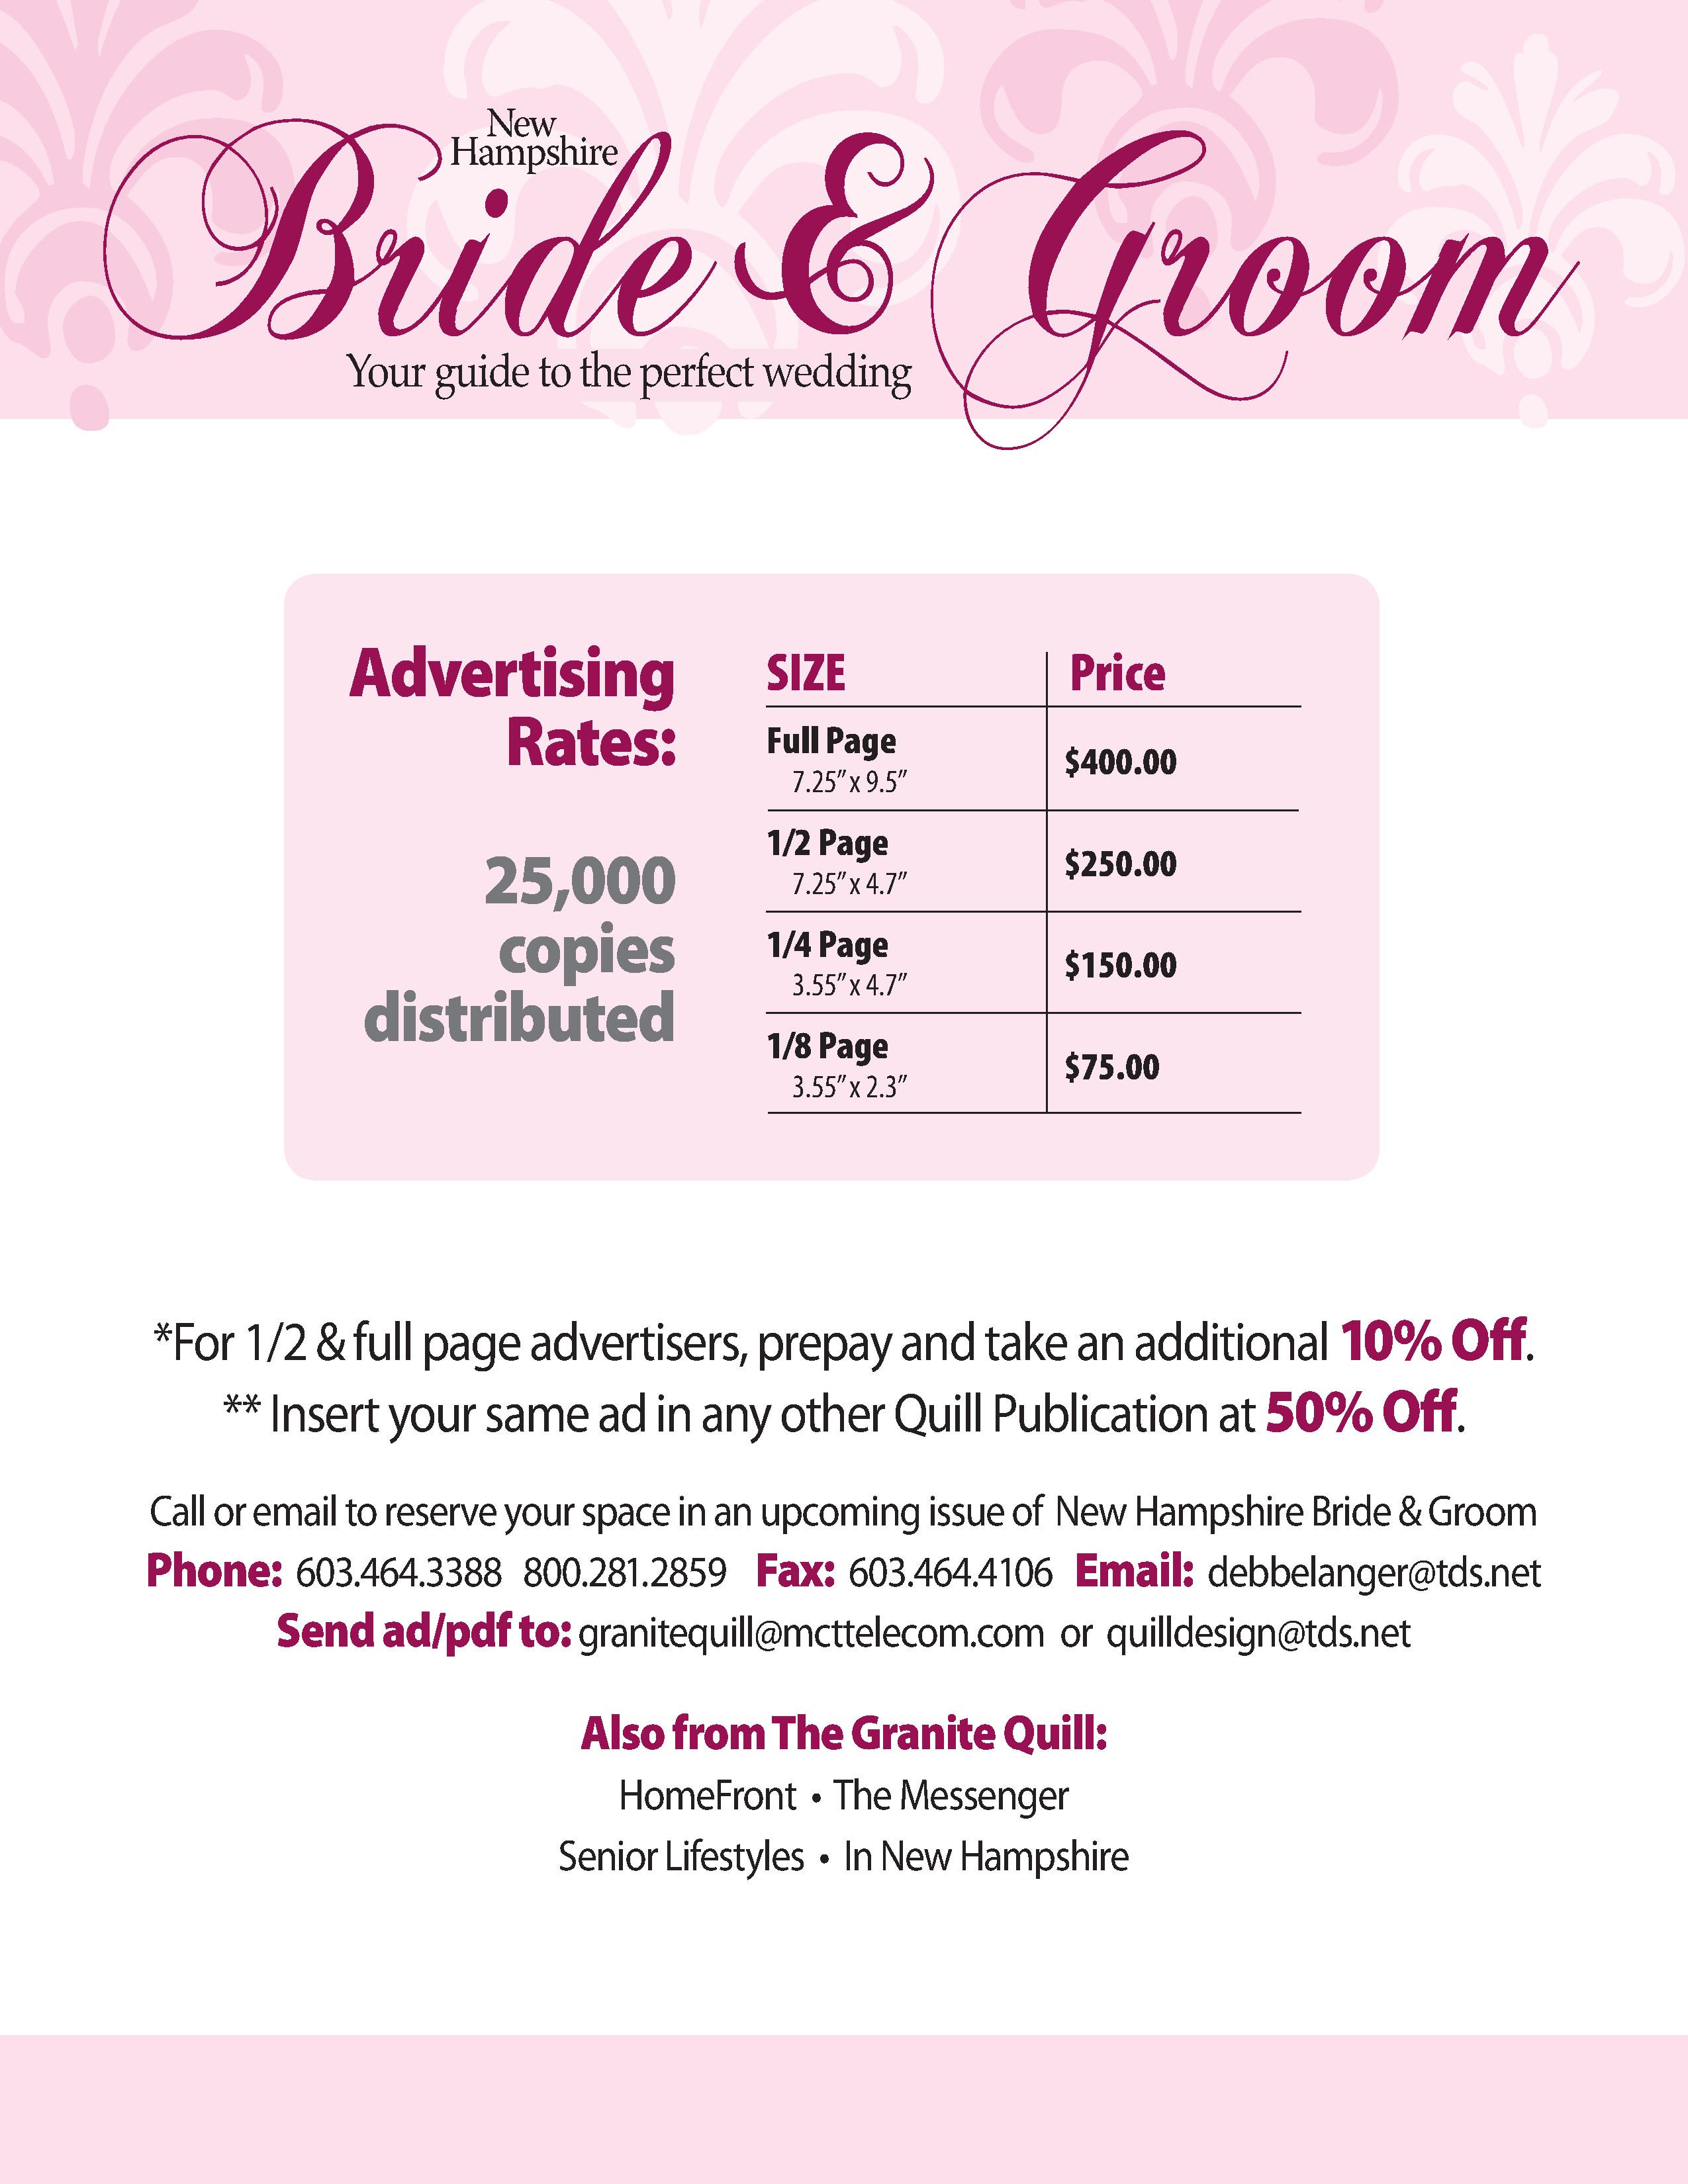 View Bridal Guide Rates & Distribution